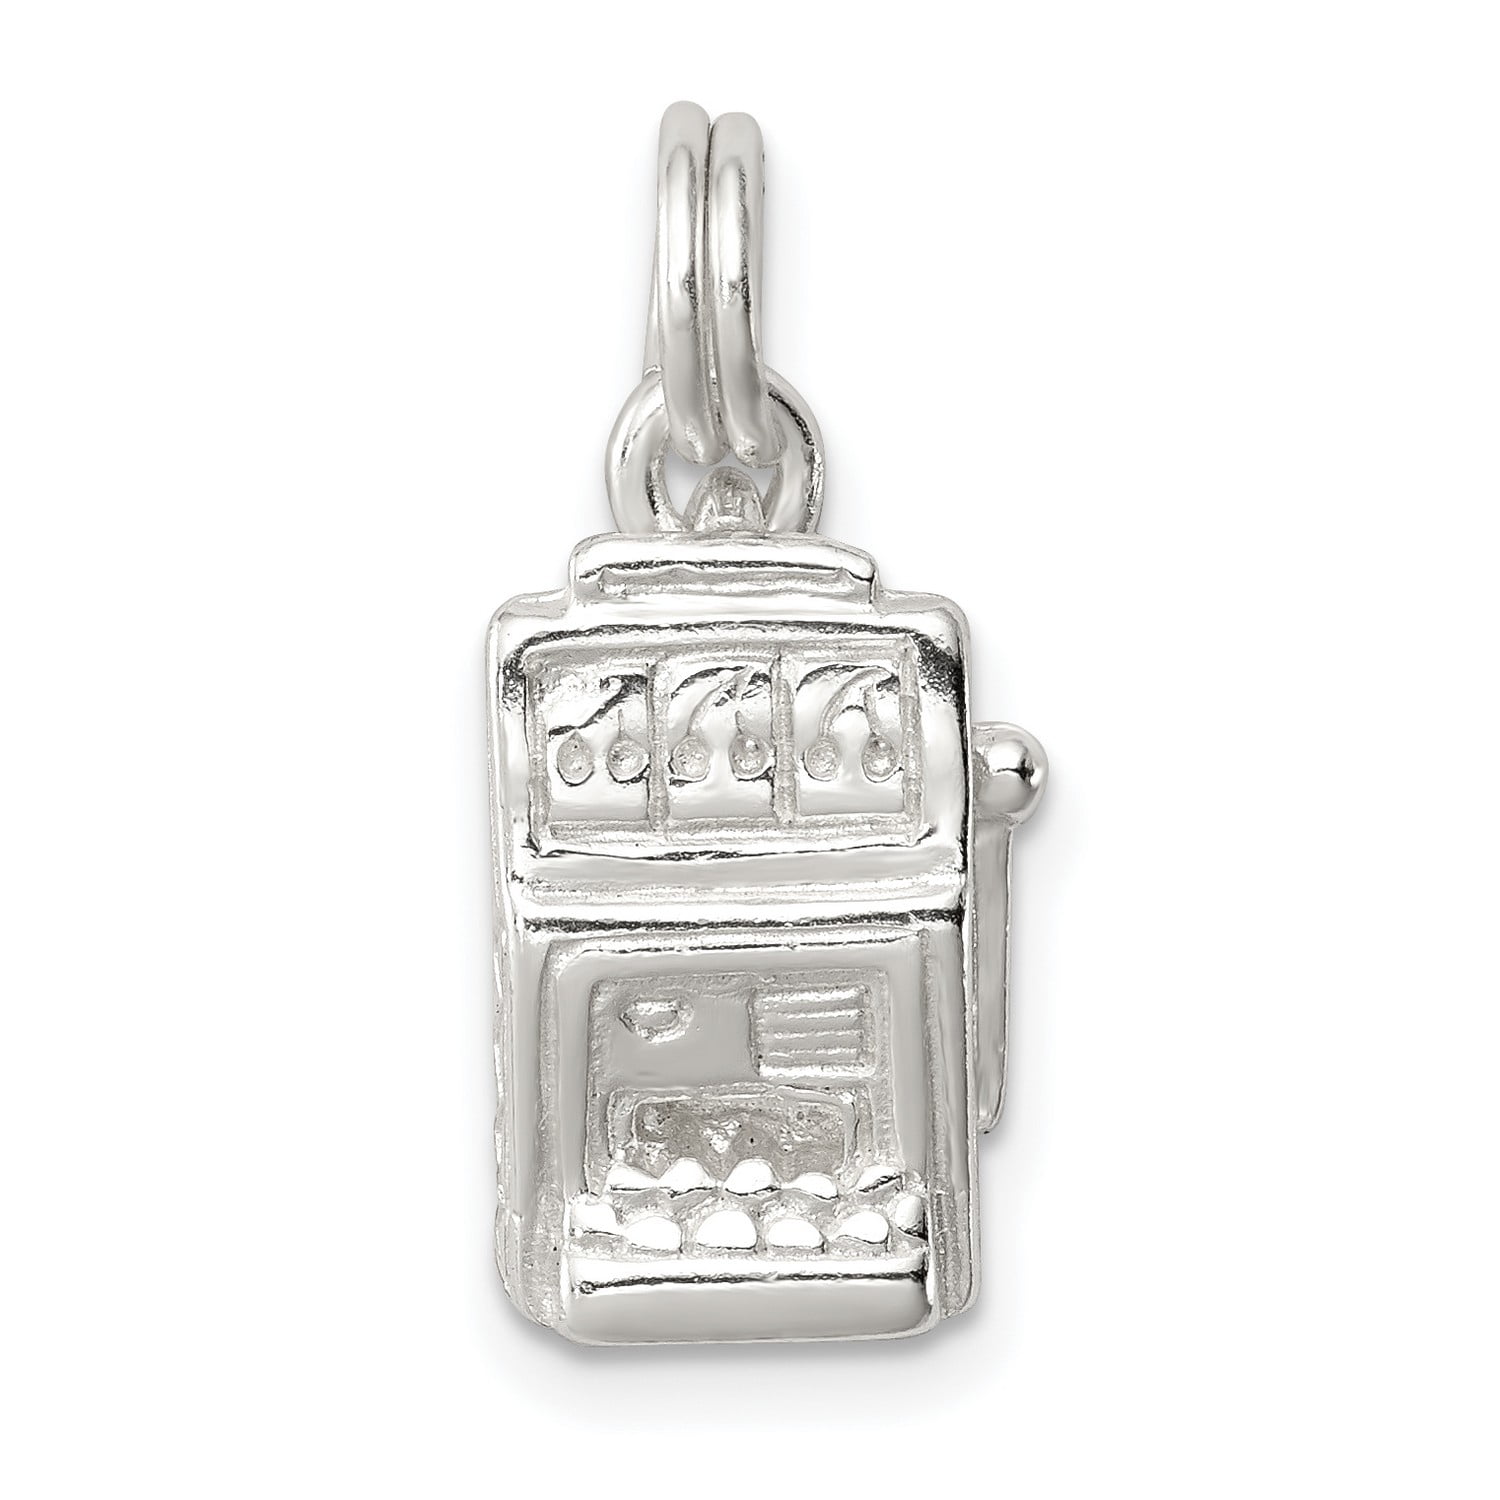 Silver Yellow Plated Slot Machine Charm 35mm